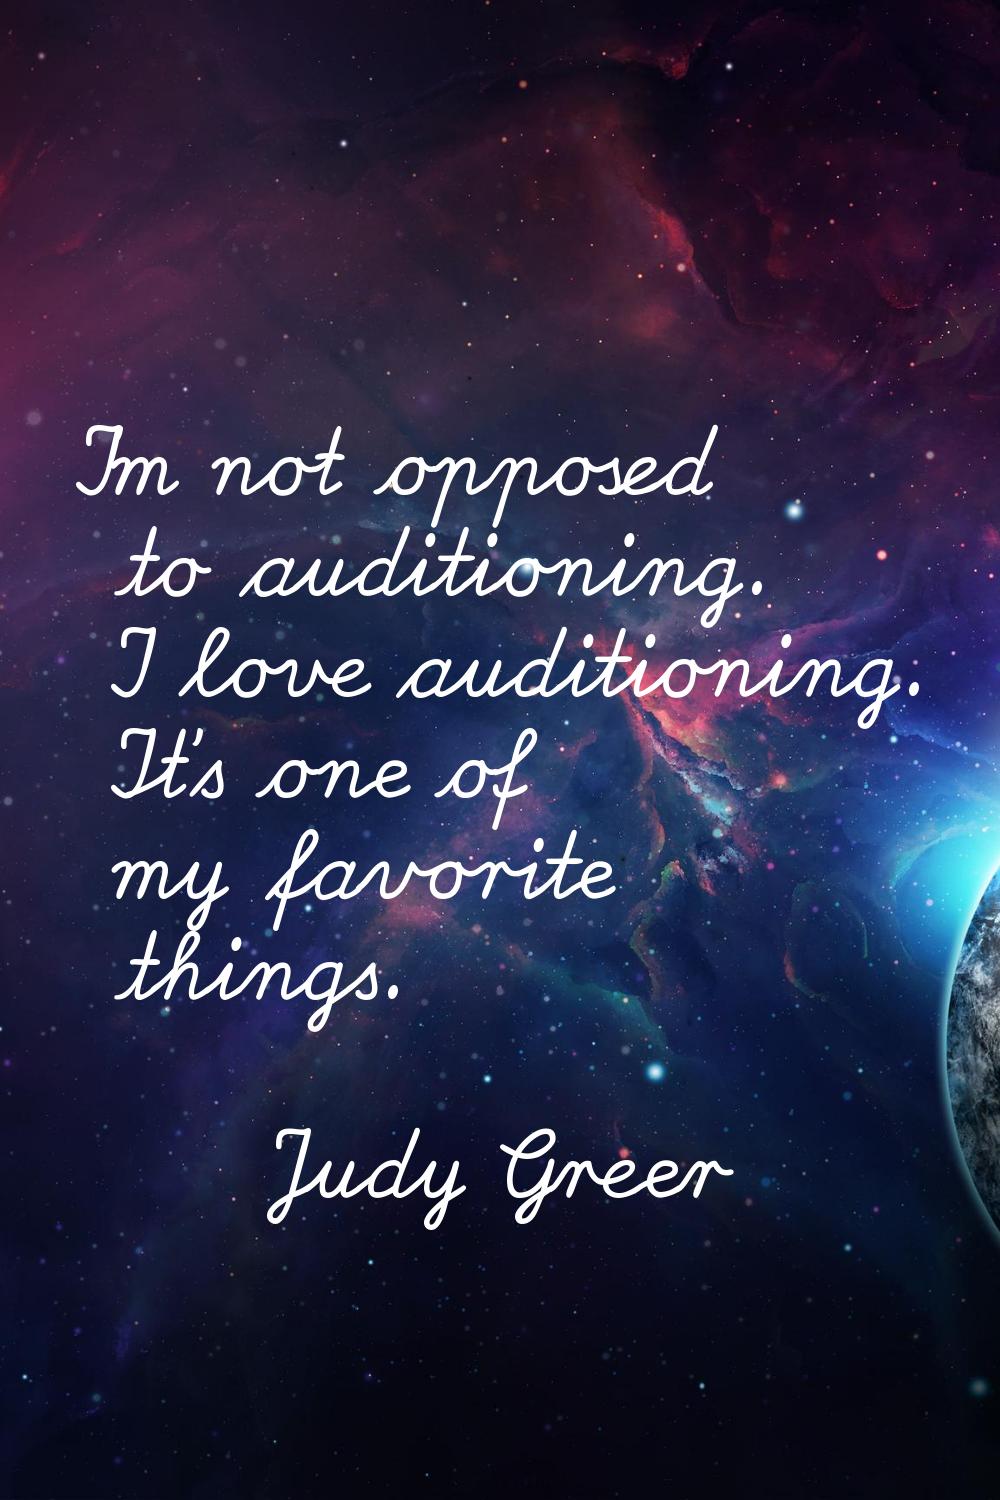 I'm not opposed to auditioning. I love auditioning. It's one of my favorite things.